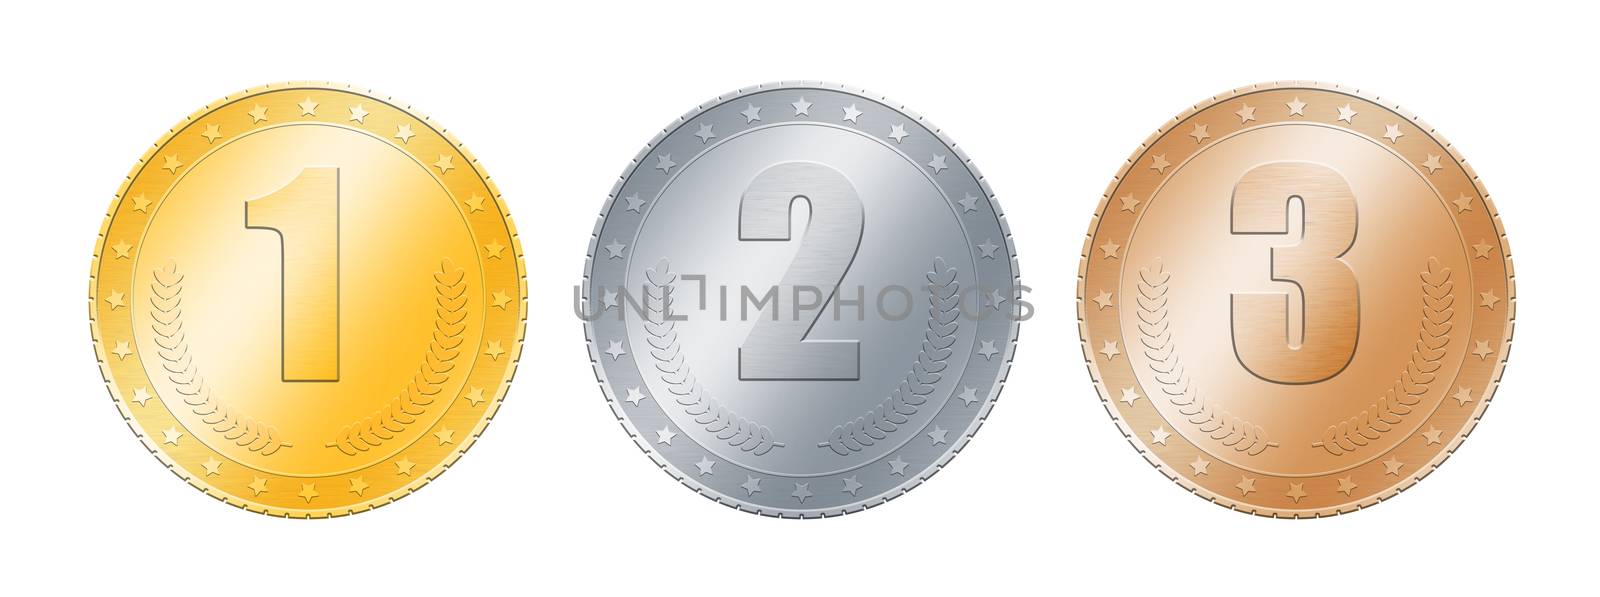 Gold, silver, bronze coins or medals over white by BreakingTheWalls